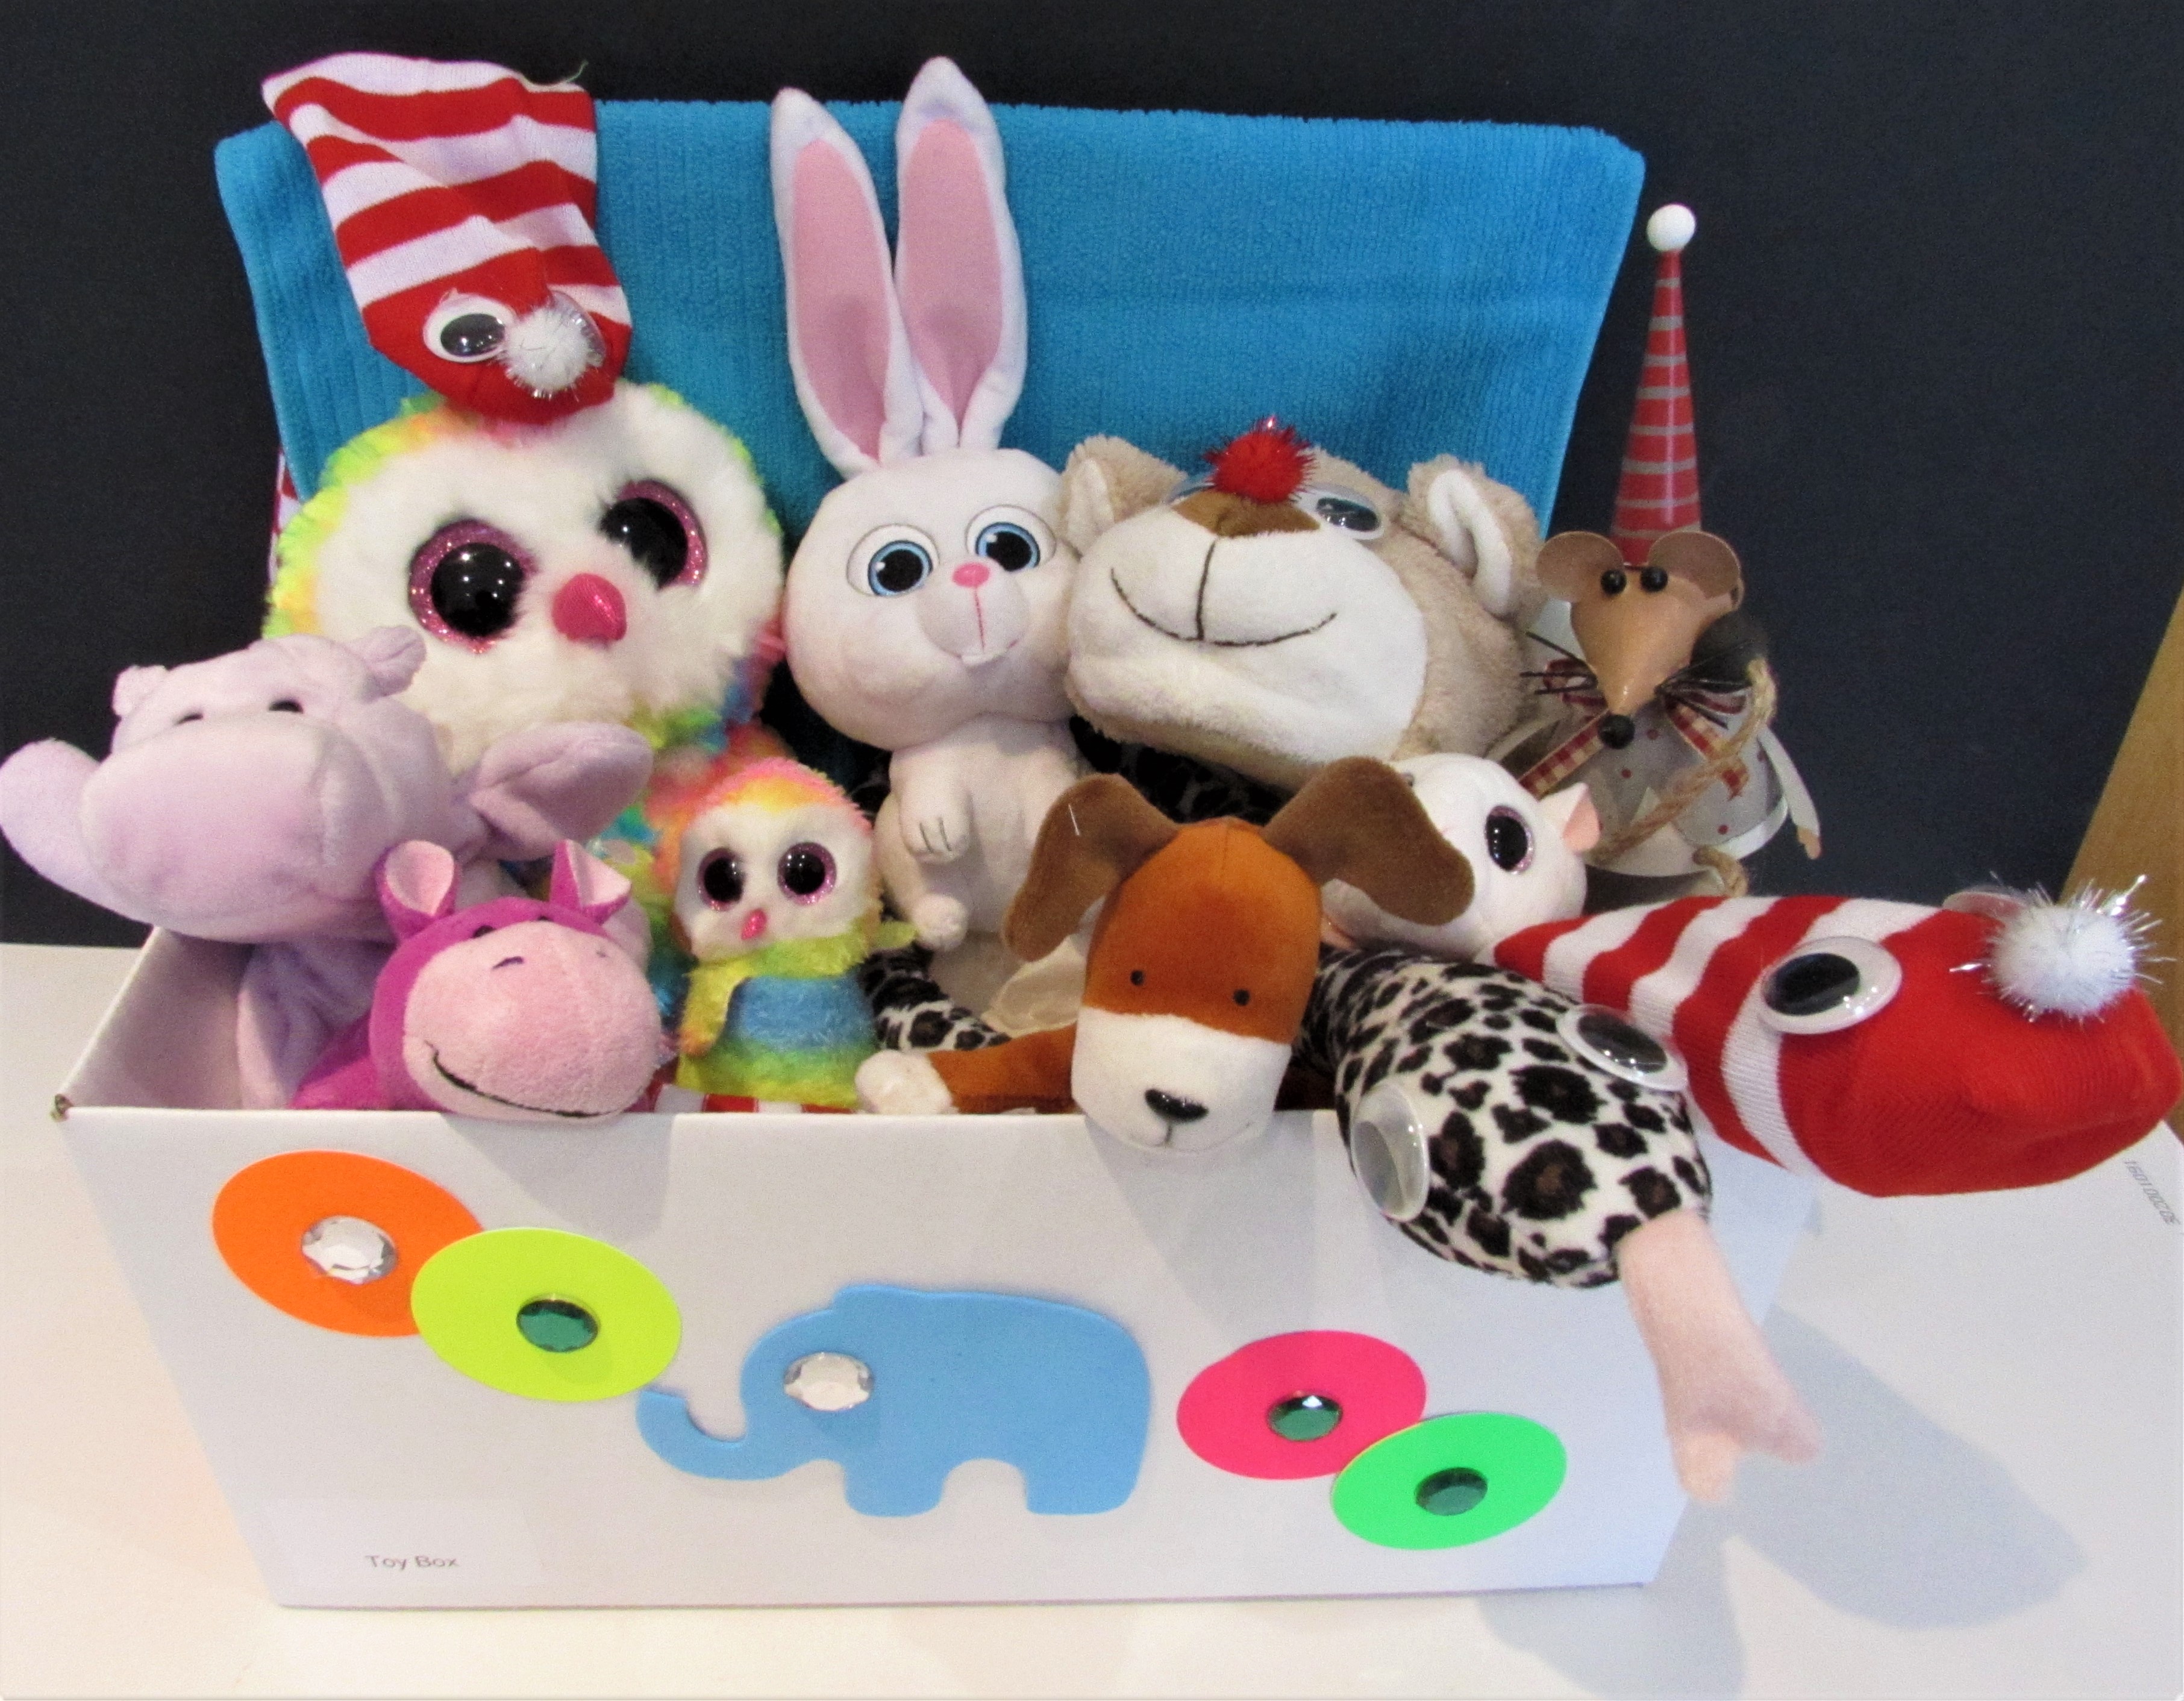 stuffed toys in a small toy box